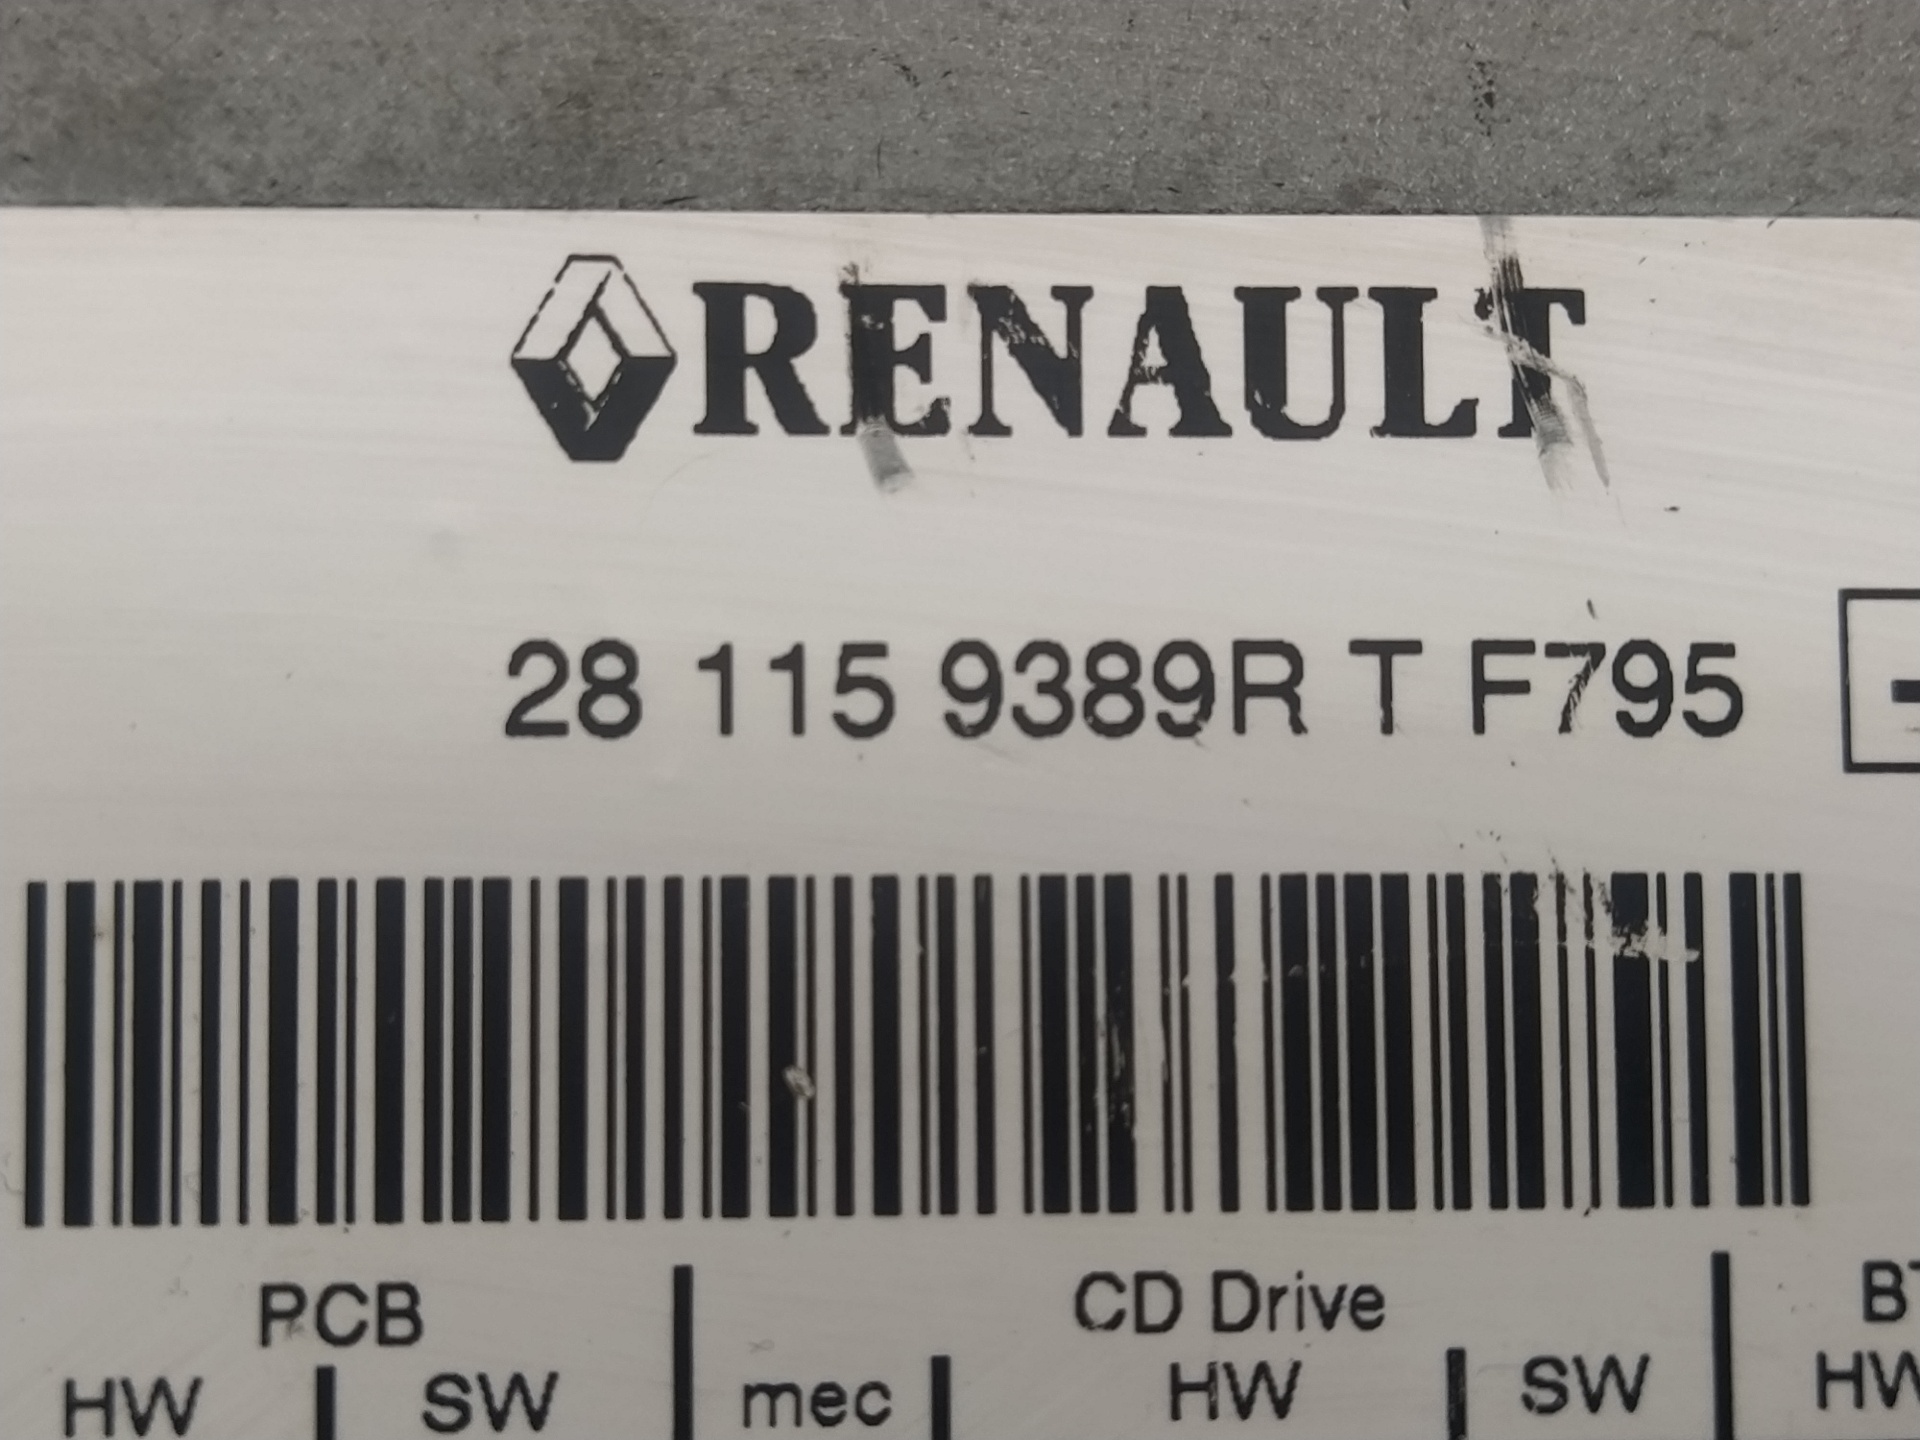 RENAULT Music Player Without GPS 281159389RTF795, 7469189391 24018121